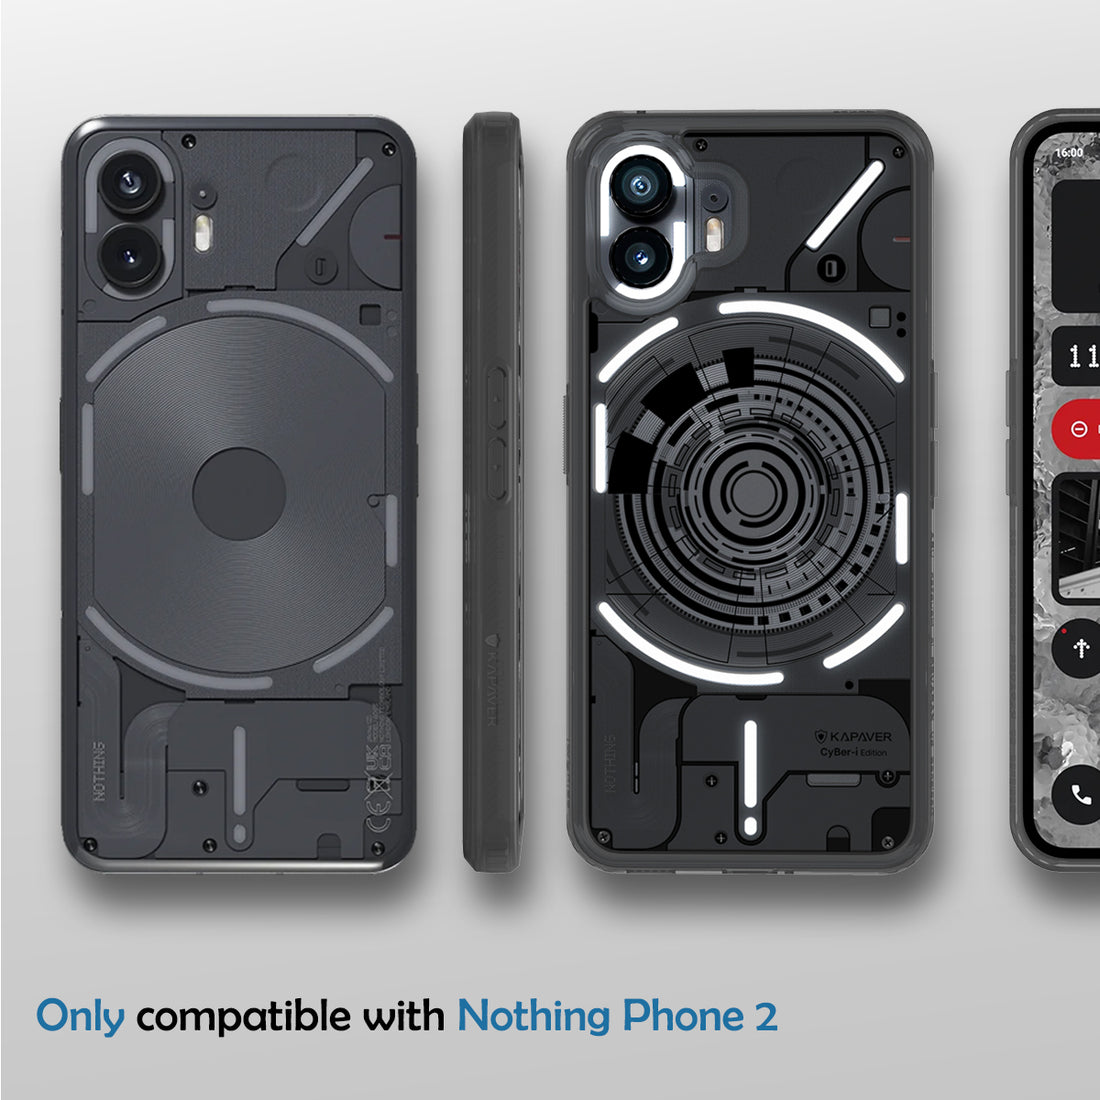 Nothing Phone 2 Back Cover Case Cyber-i Edition - Smoke Black [CyBer-01]